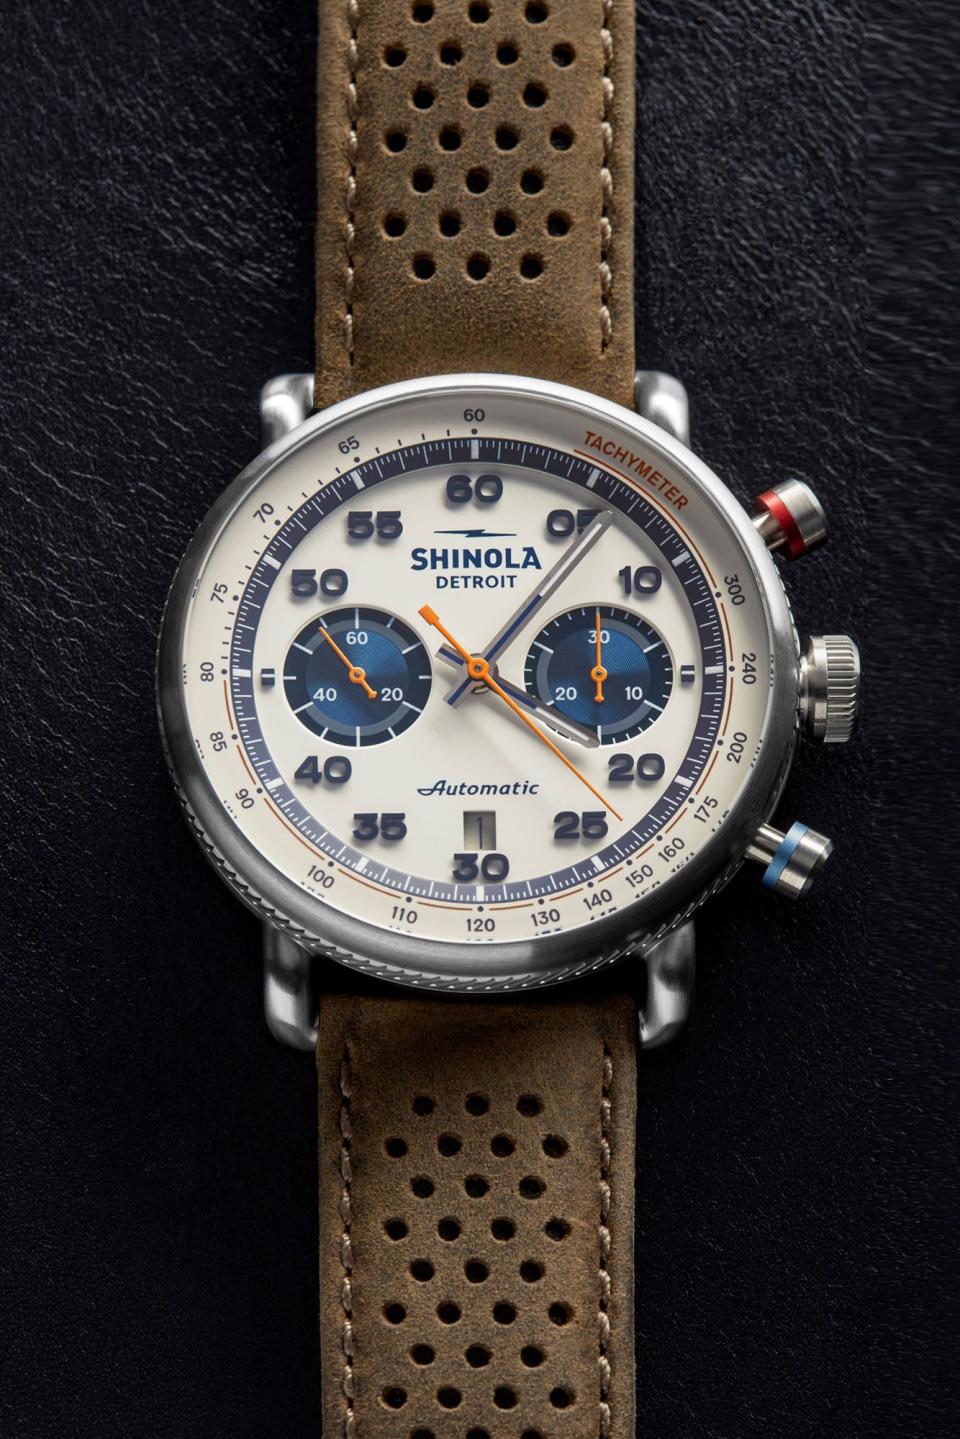 The limited edition Canfield Speedway Automatic Chronograph which will be given to the winner of the 2023 Detroit Grand Prix Sunday.